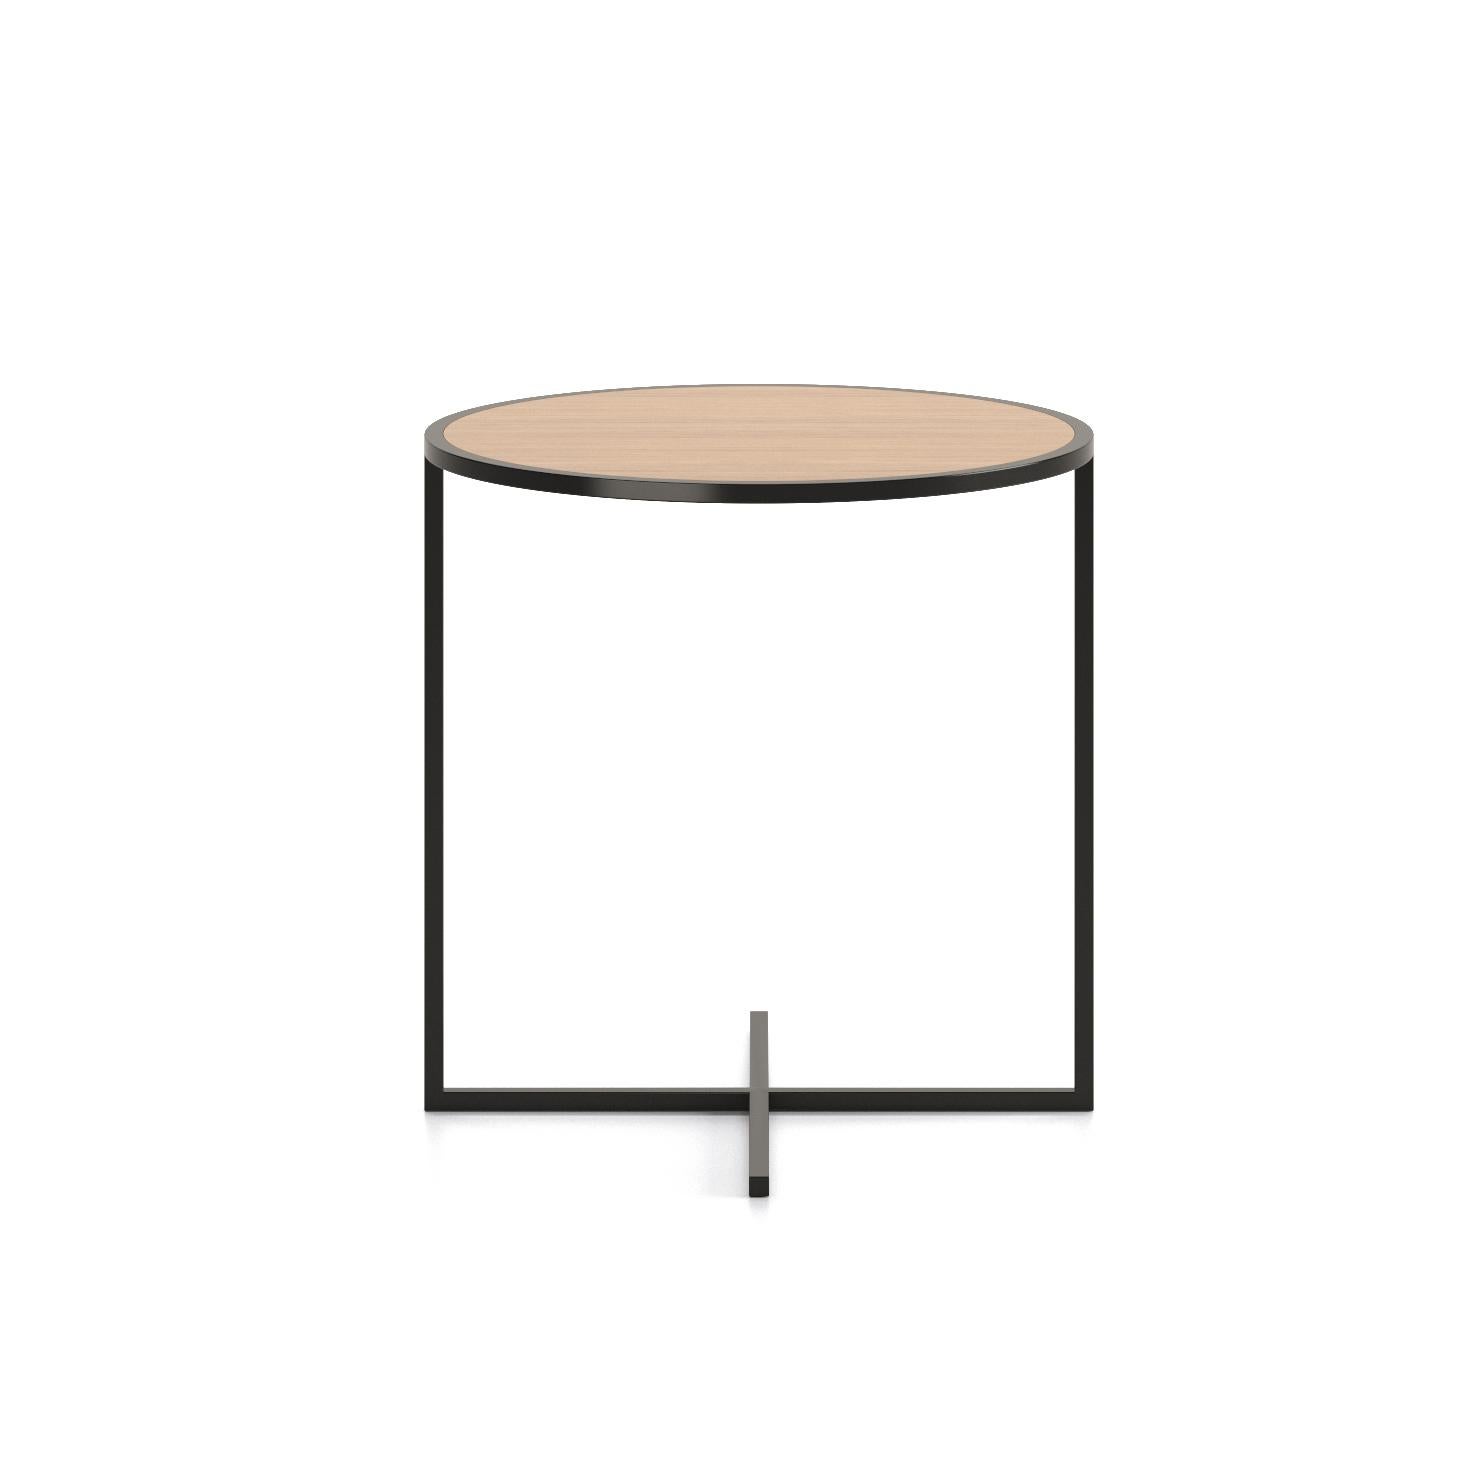 With its clever, stylish design, Holy Day is the ideal table to be placed next to a sofa.

Structure in calibrated lacquered steel tube in thermoreinforced polyester in black.

Please note that we are currently unable to confirm and fulfill orders